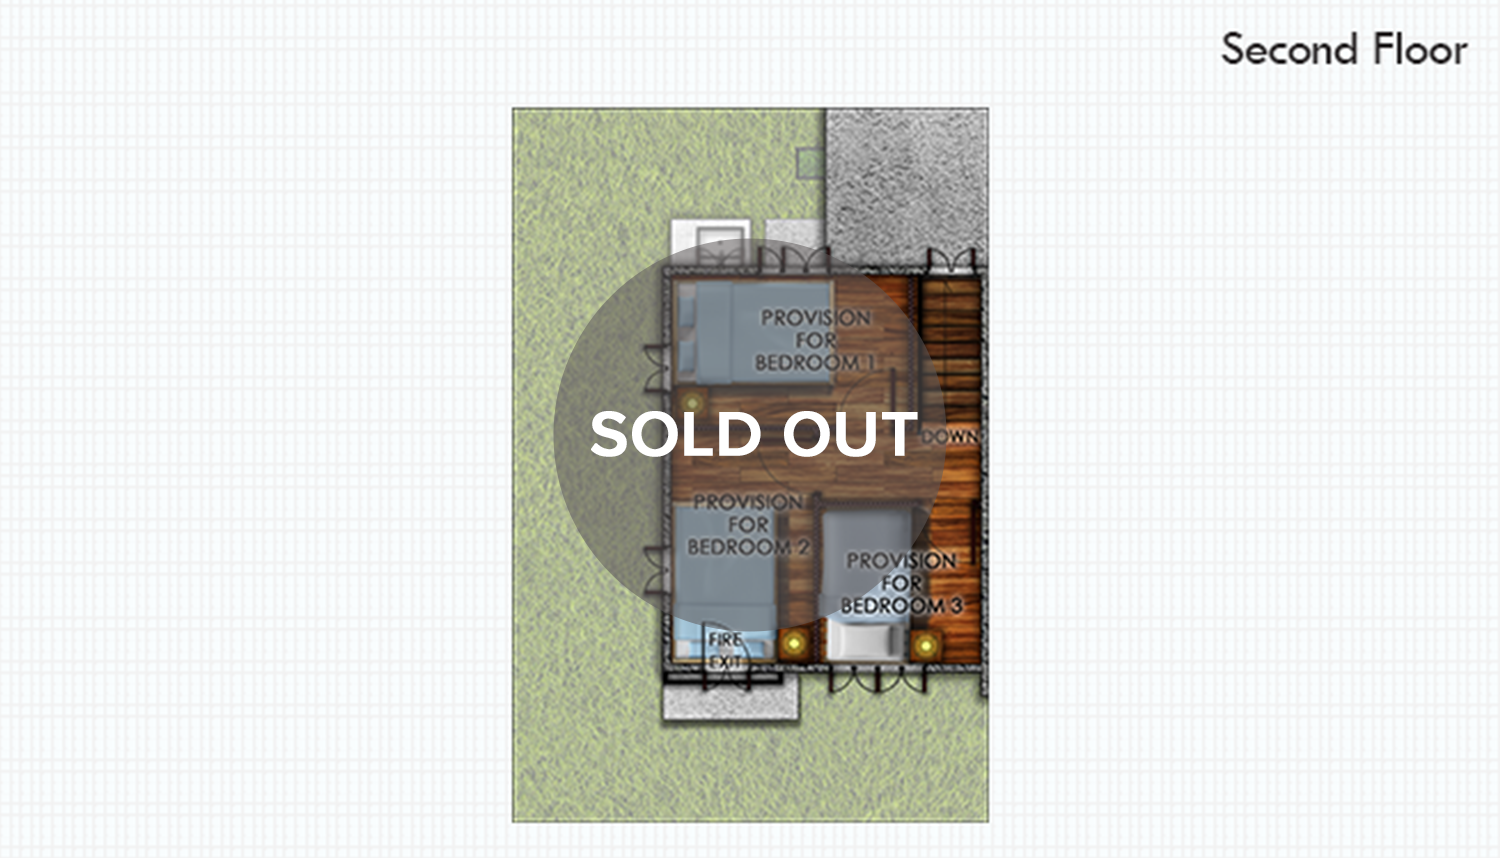 /assets/properties-house-model-gallery-and-landmarks-icons/lumina-home-models/home-model-gallery/armina-single-firewall/armina-single-firewall-second-floor-plan-sold-out.png